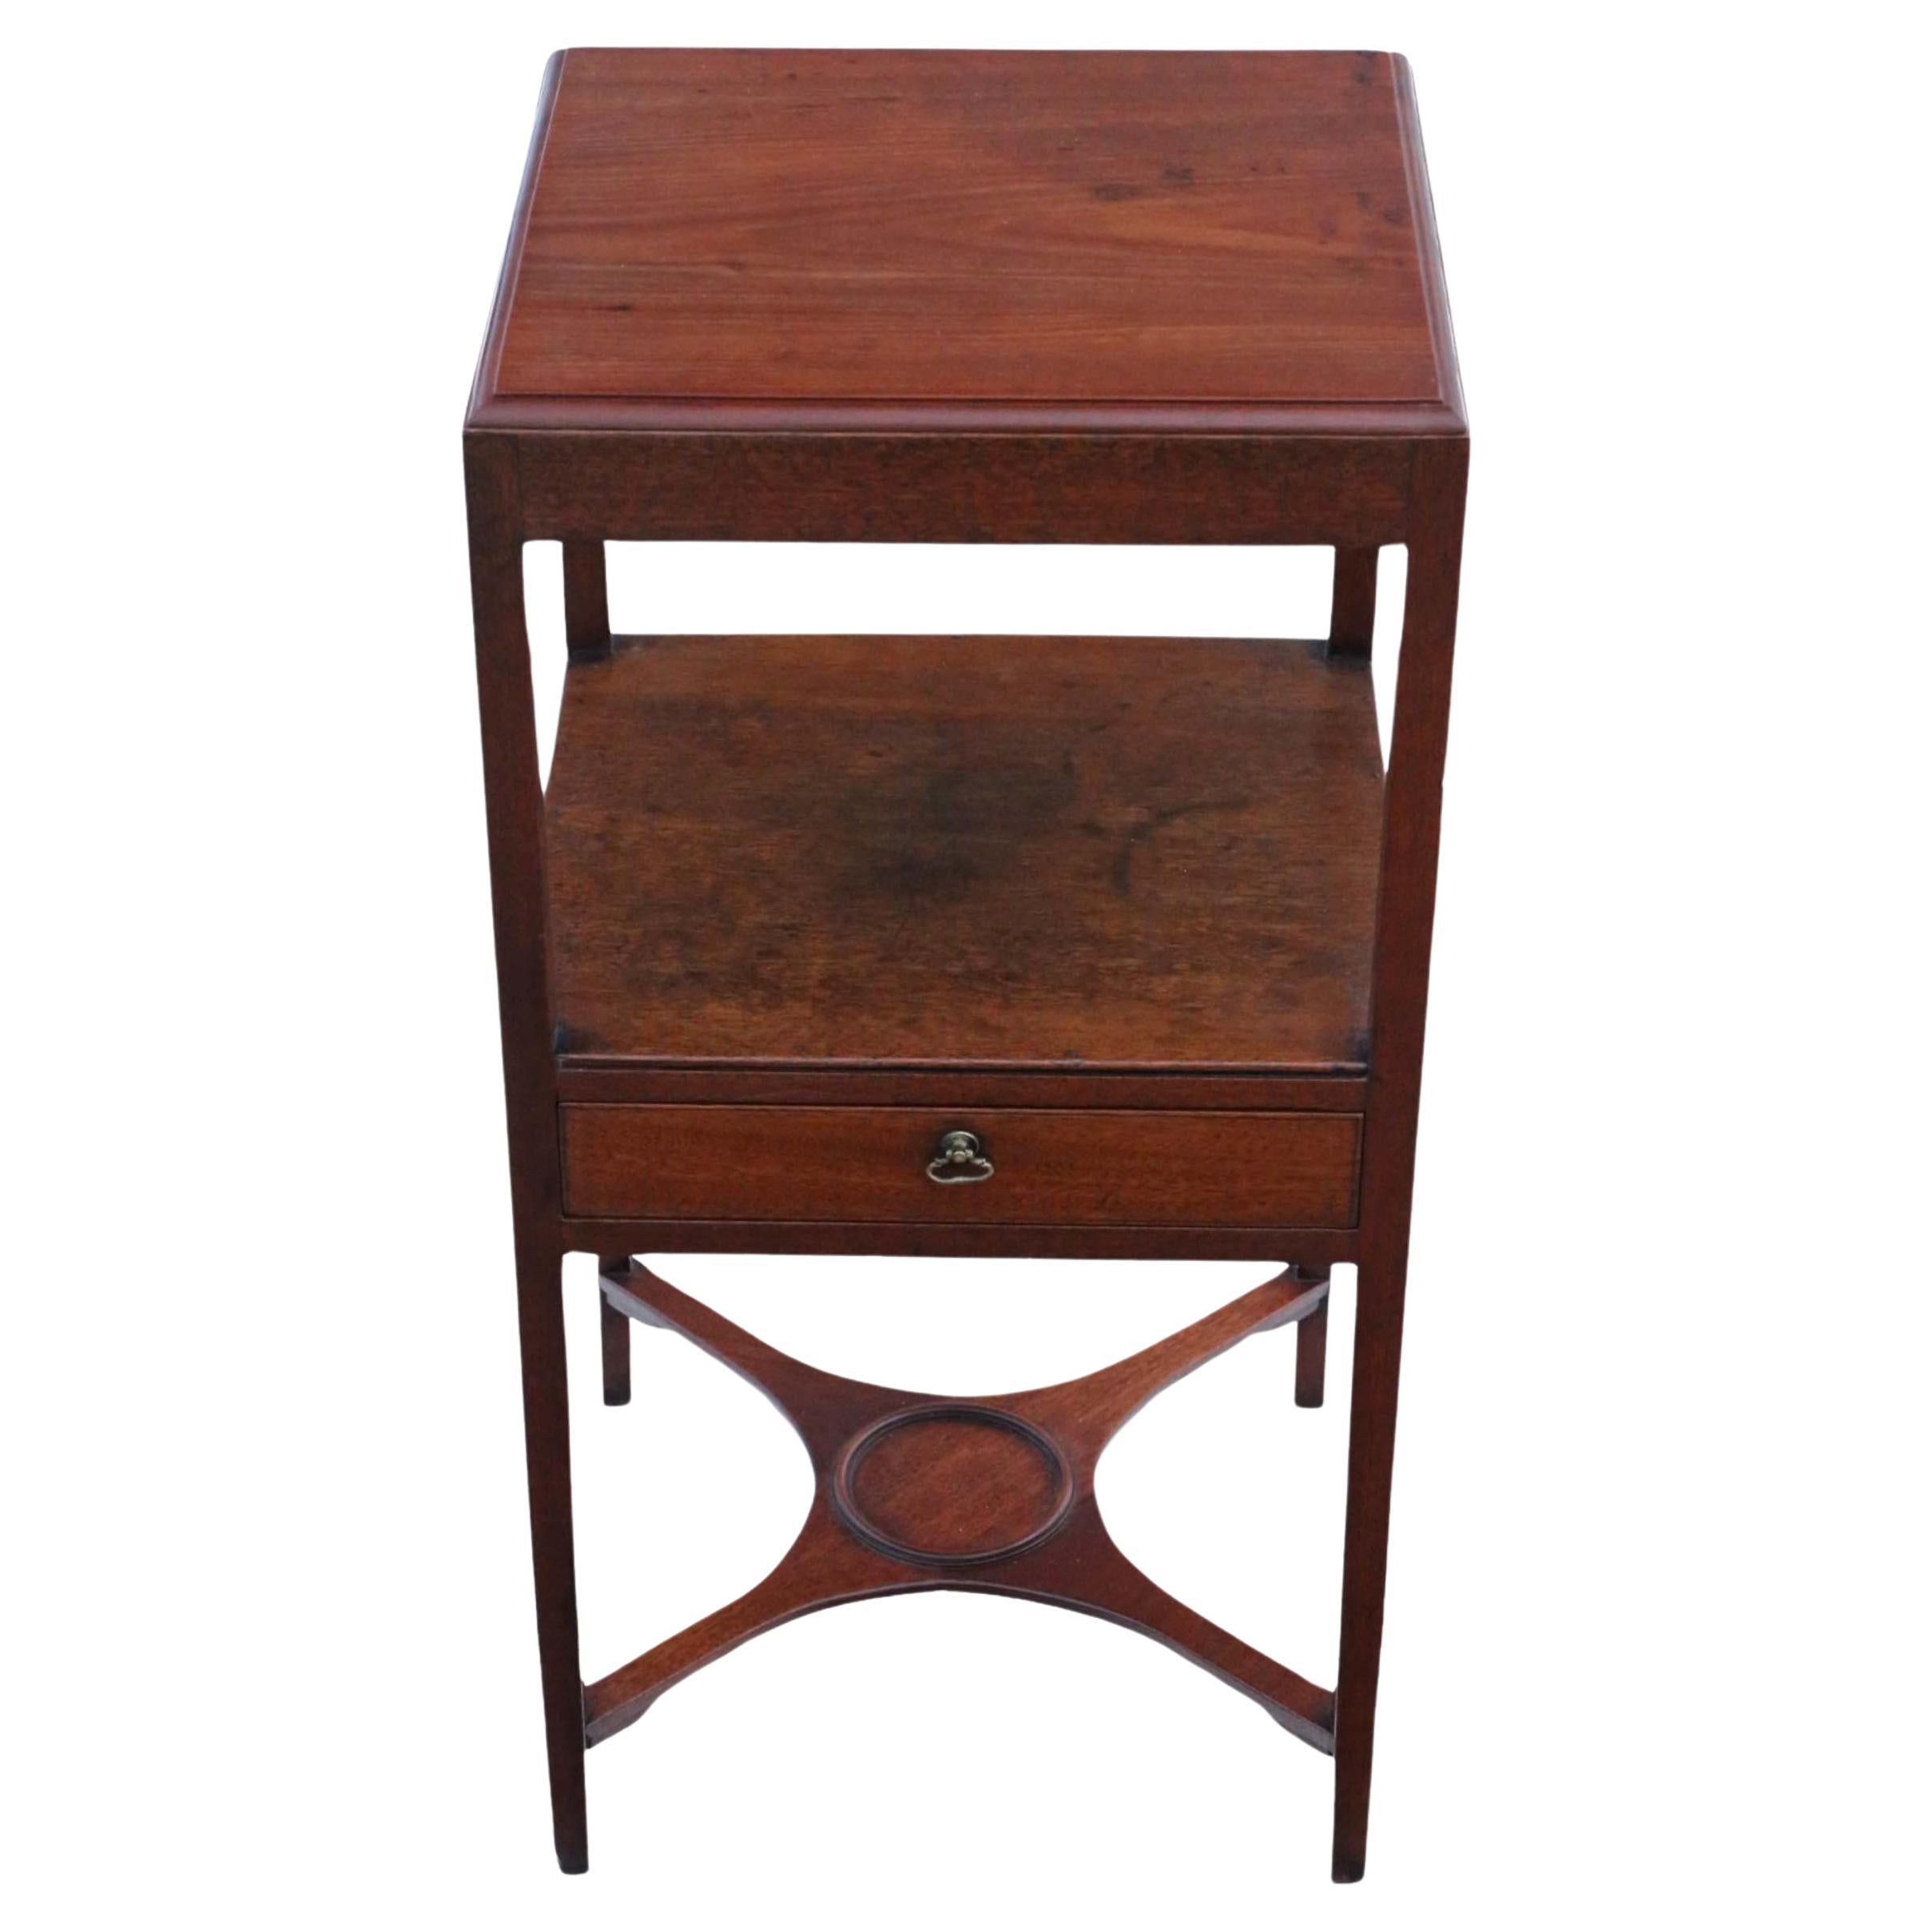 Antique quality Georgian mahogany washstand bedside table nightstand C1800